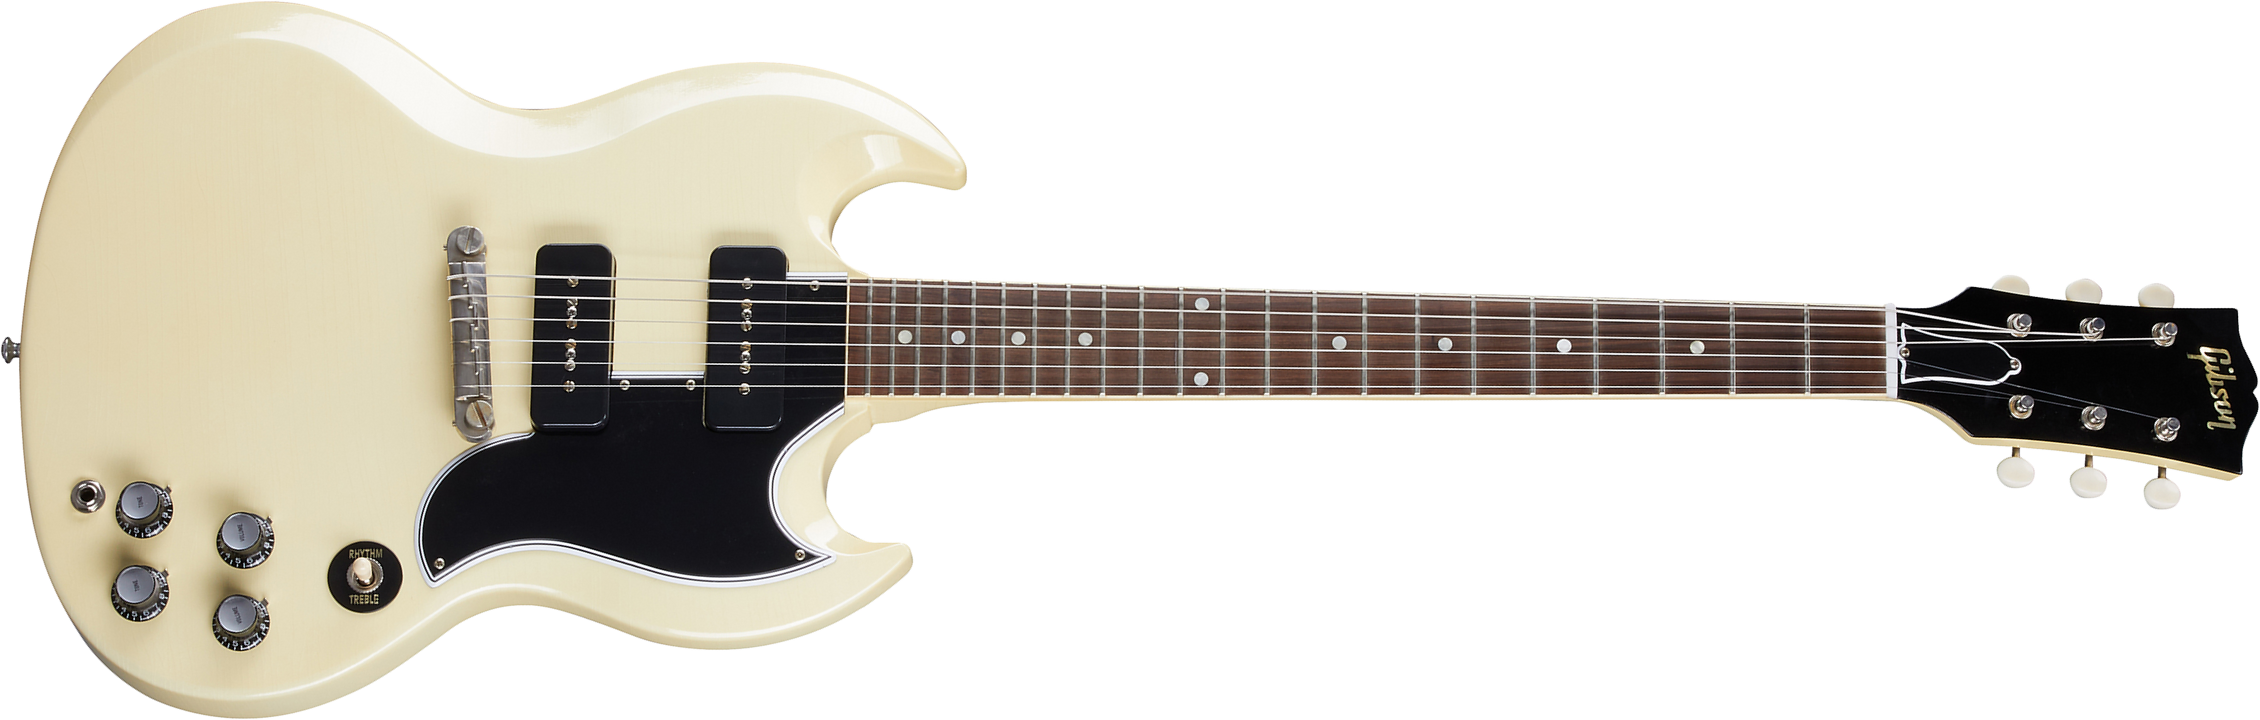 Gibson Custom Shop Murphy Lab Sg Special 1963 Reissue 2p90 Ht Rw - Ultra Light Aged Classic White - Double cut electric guitar - Main picture